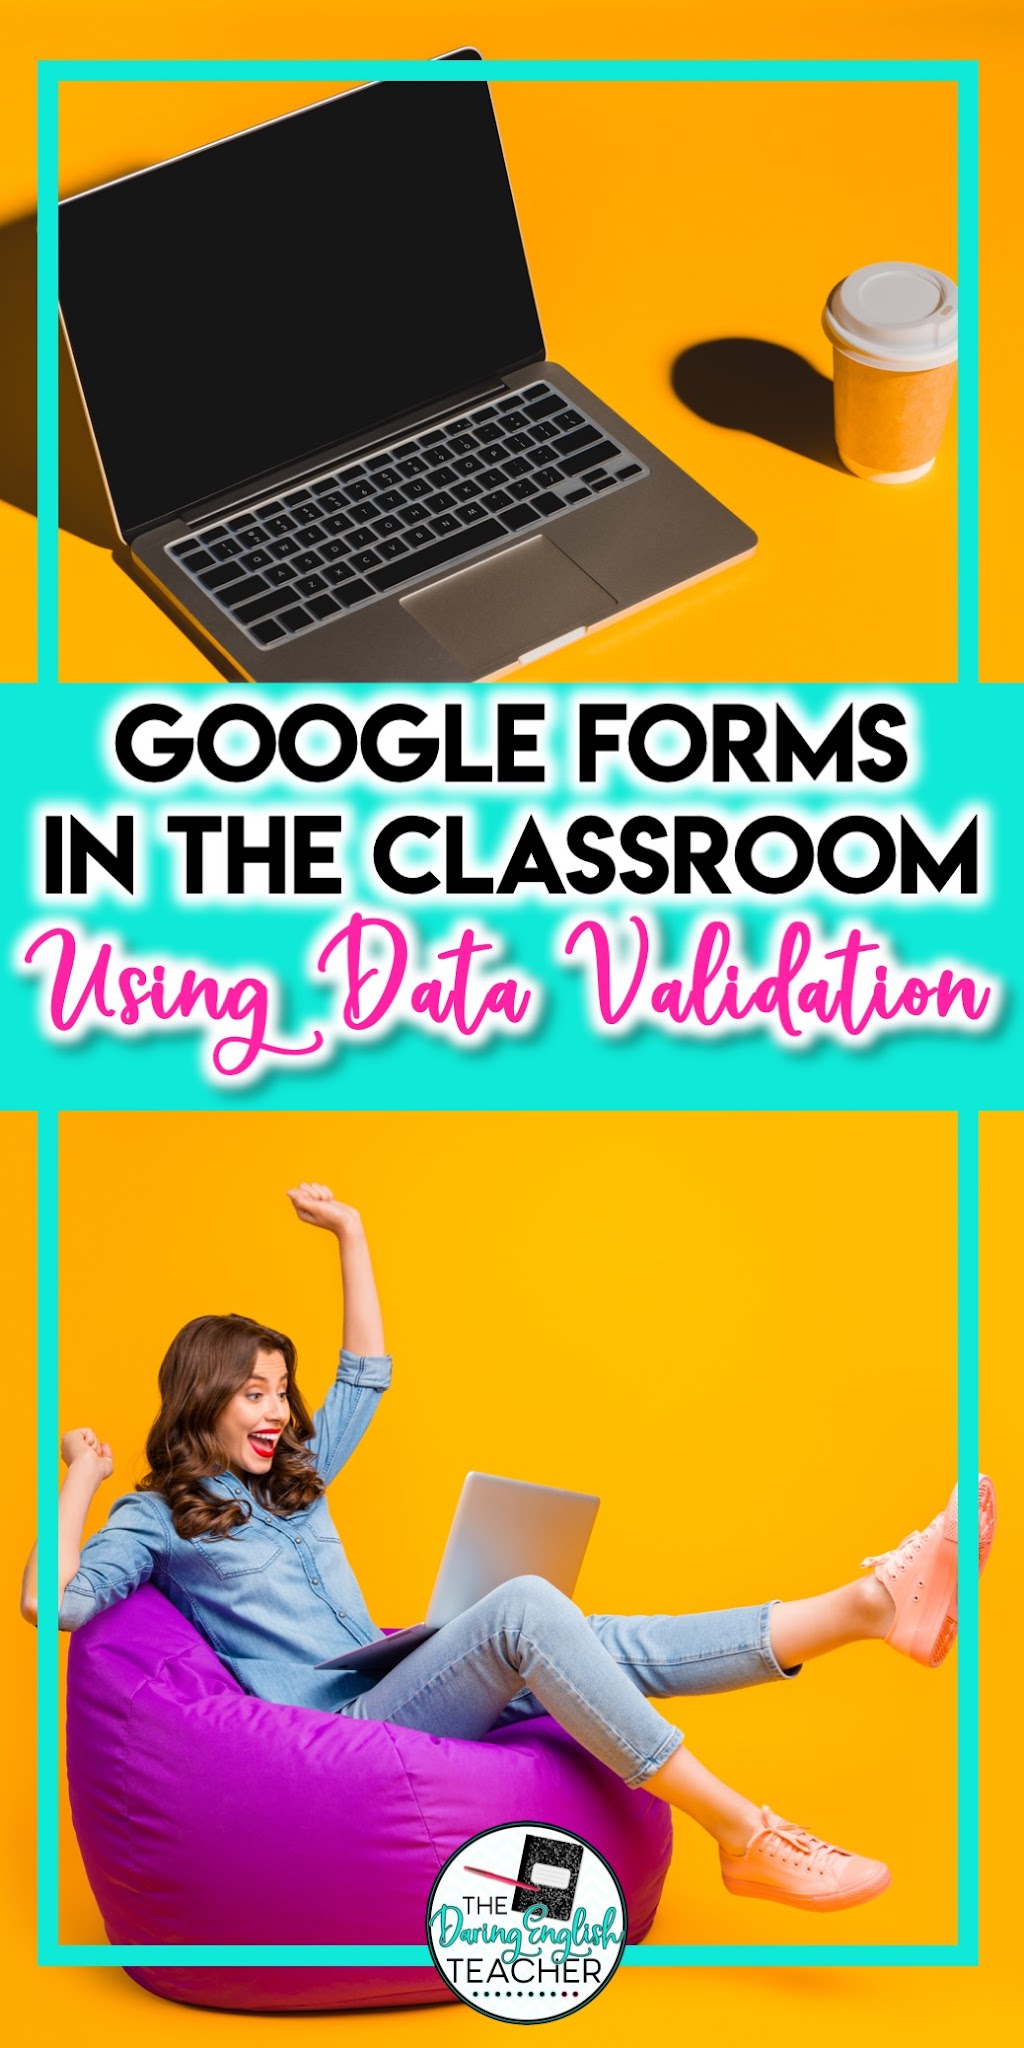 Google Forms in the Classroom Part 2: Using the Data Validation Tool